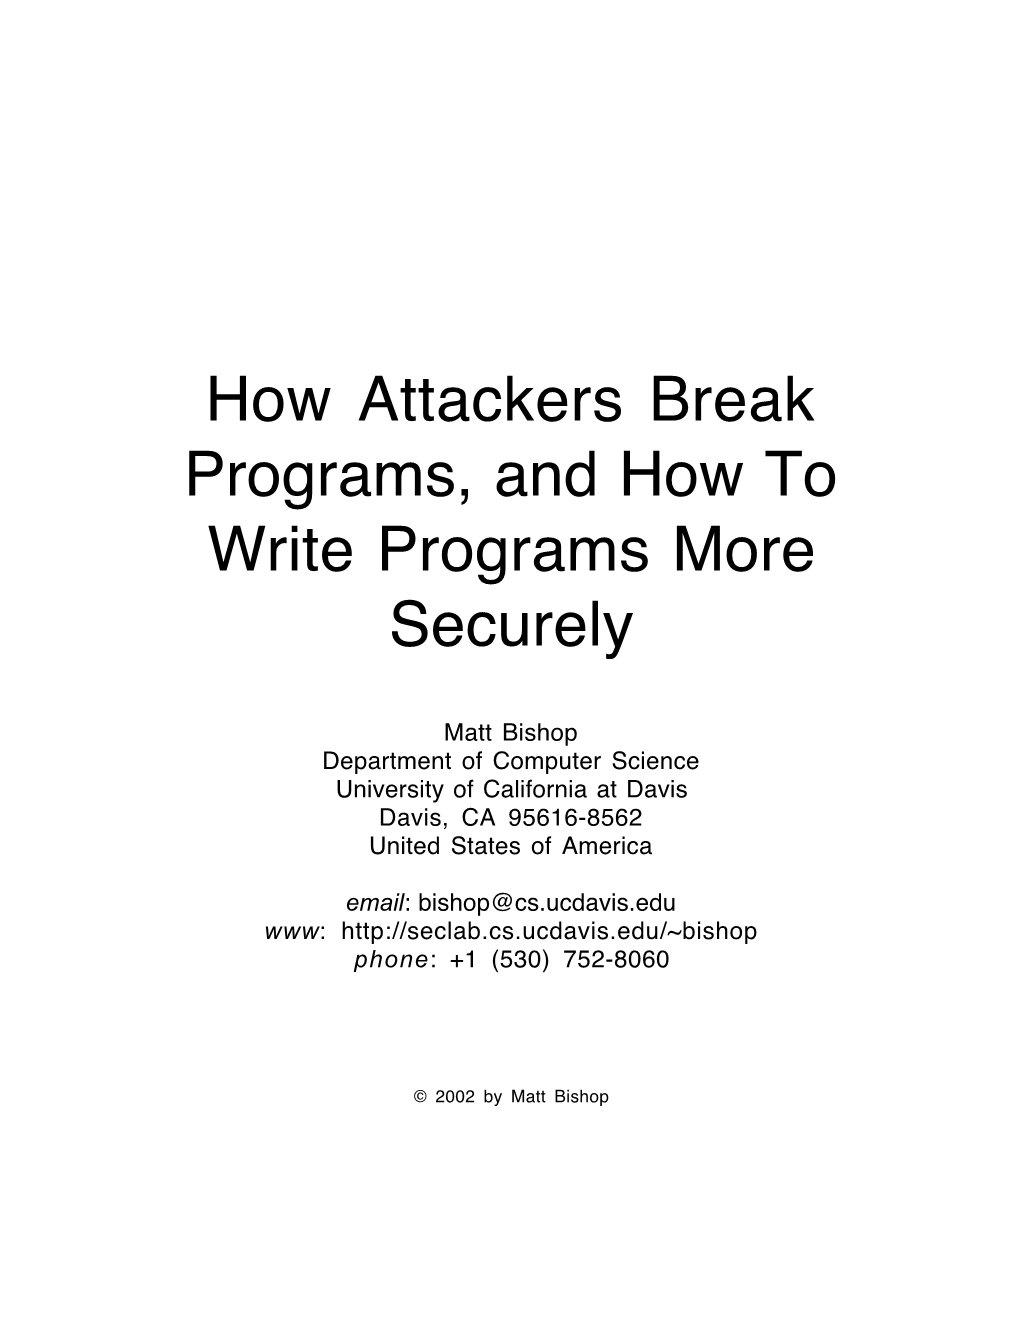 How Attackers Break Programs, and How to Write Programs More Securely